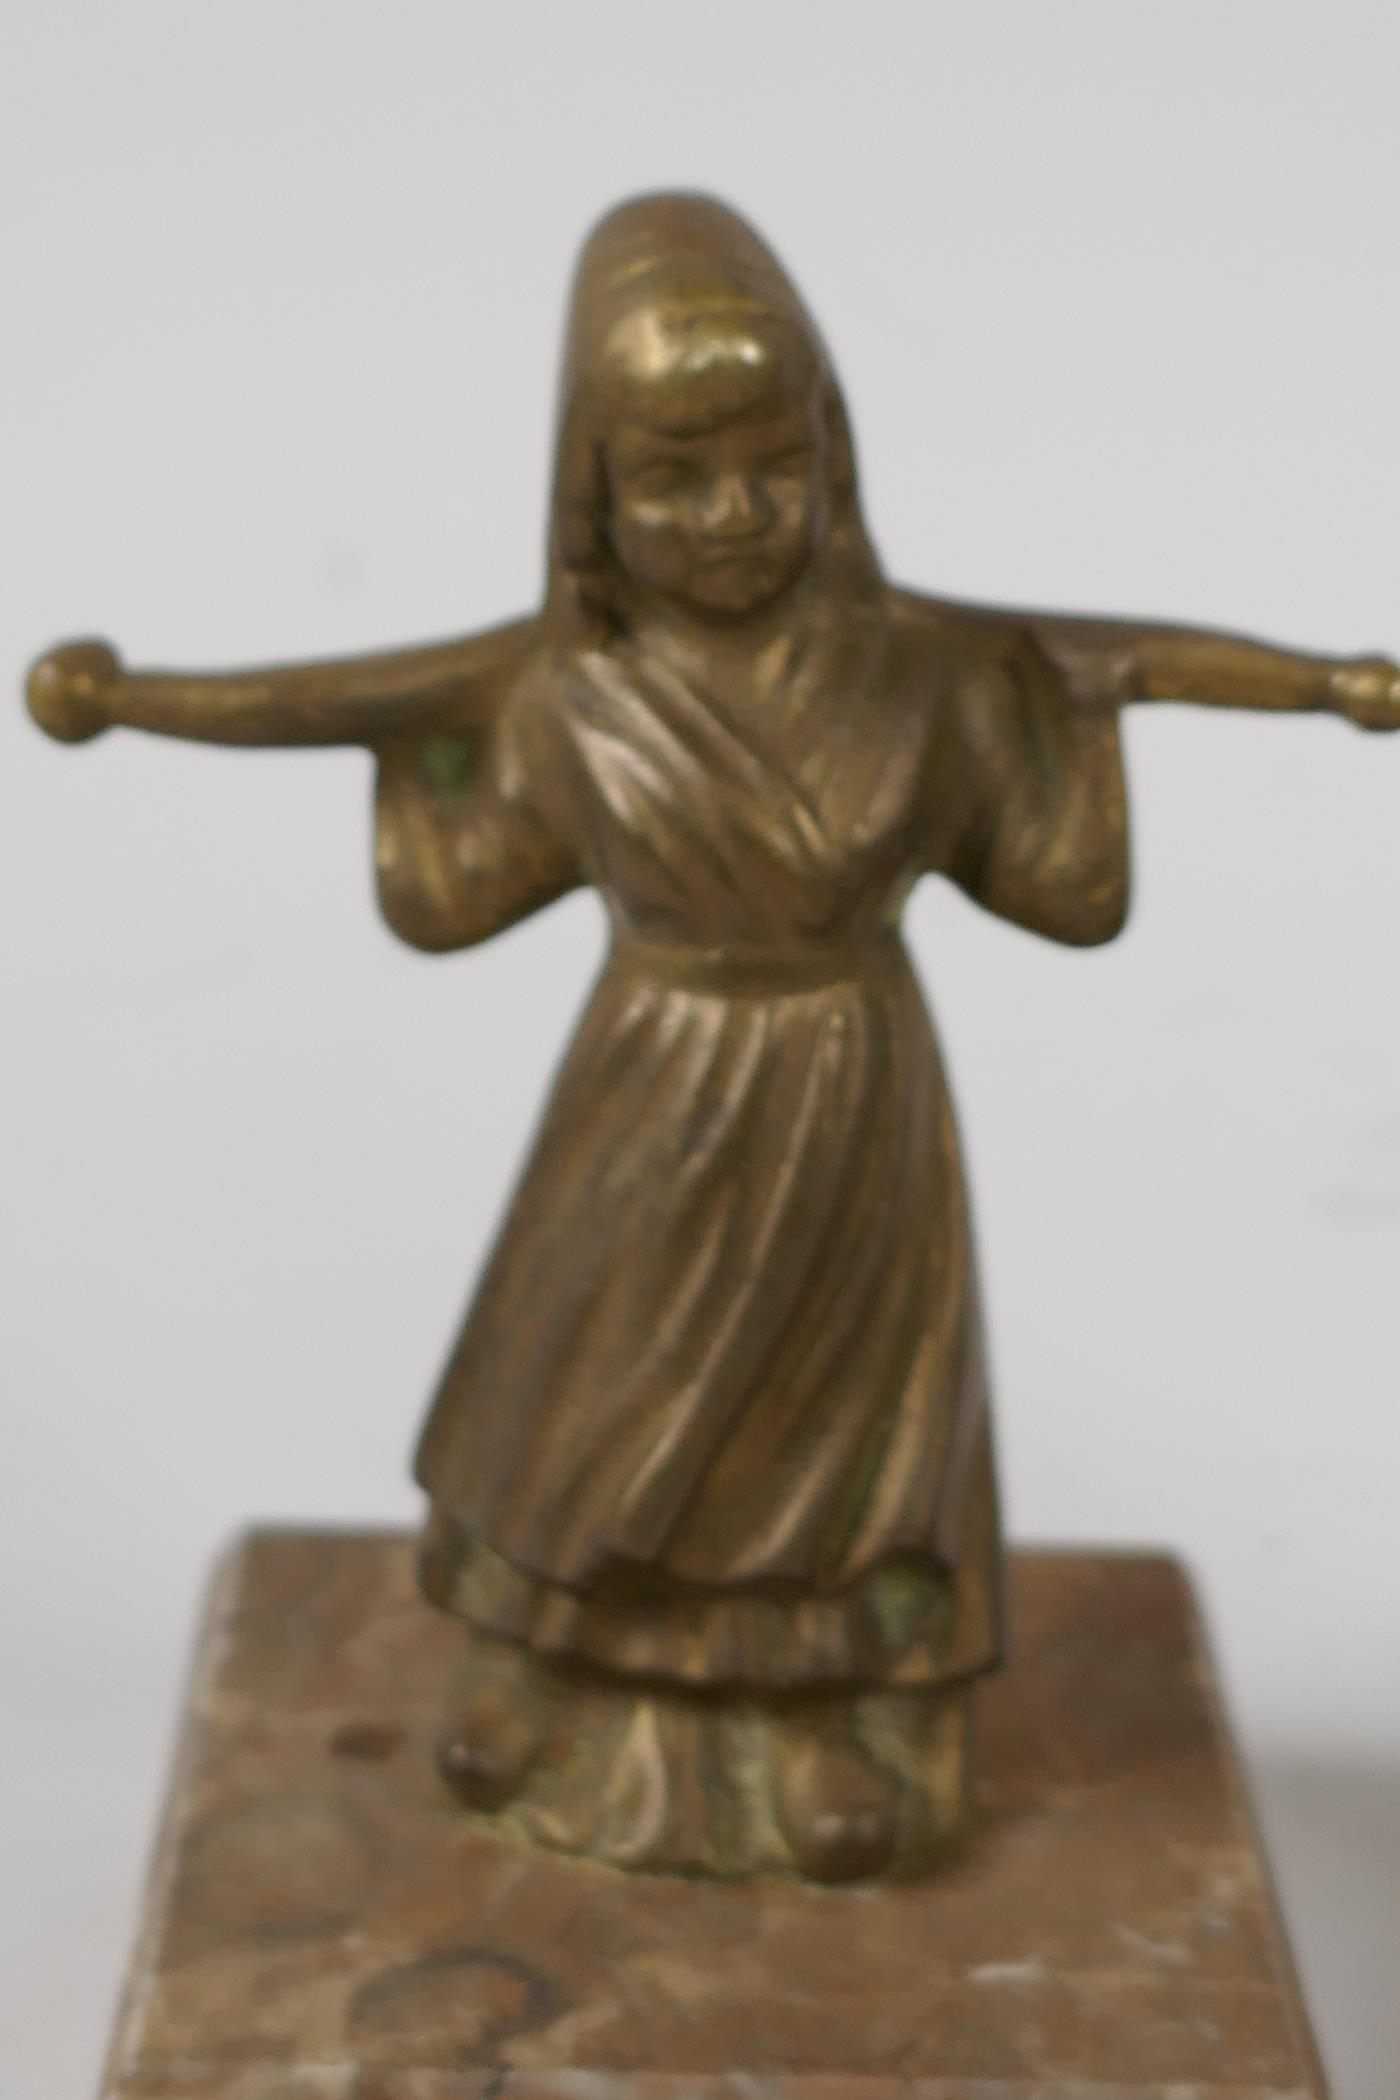 Two small brass/bronze figurines of Dutch Children, carrying yokes on their shoulders, mounted on - Image 3 of 3